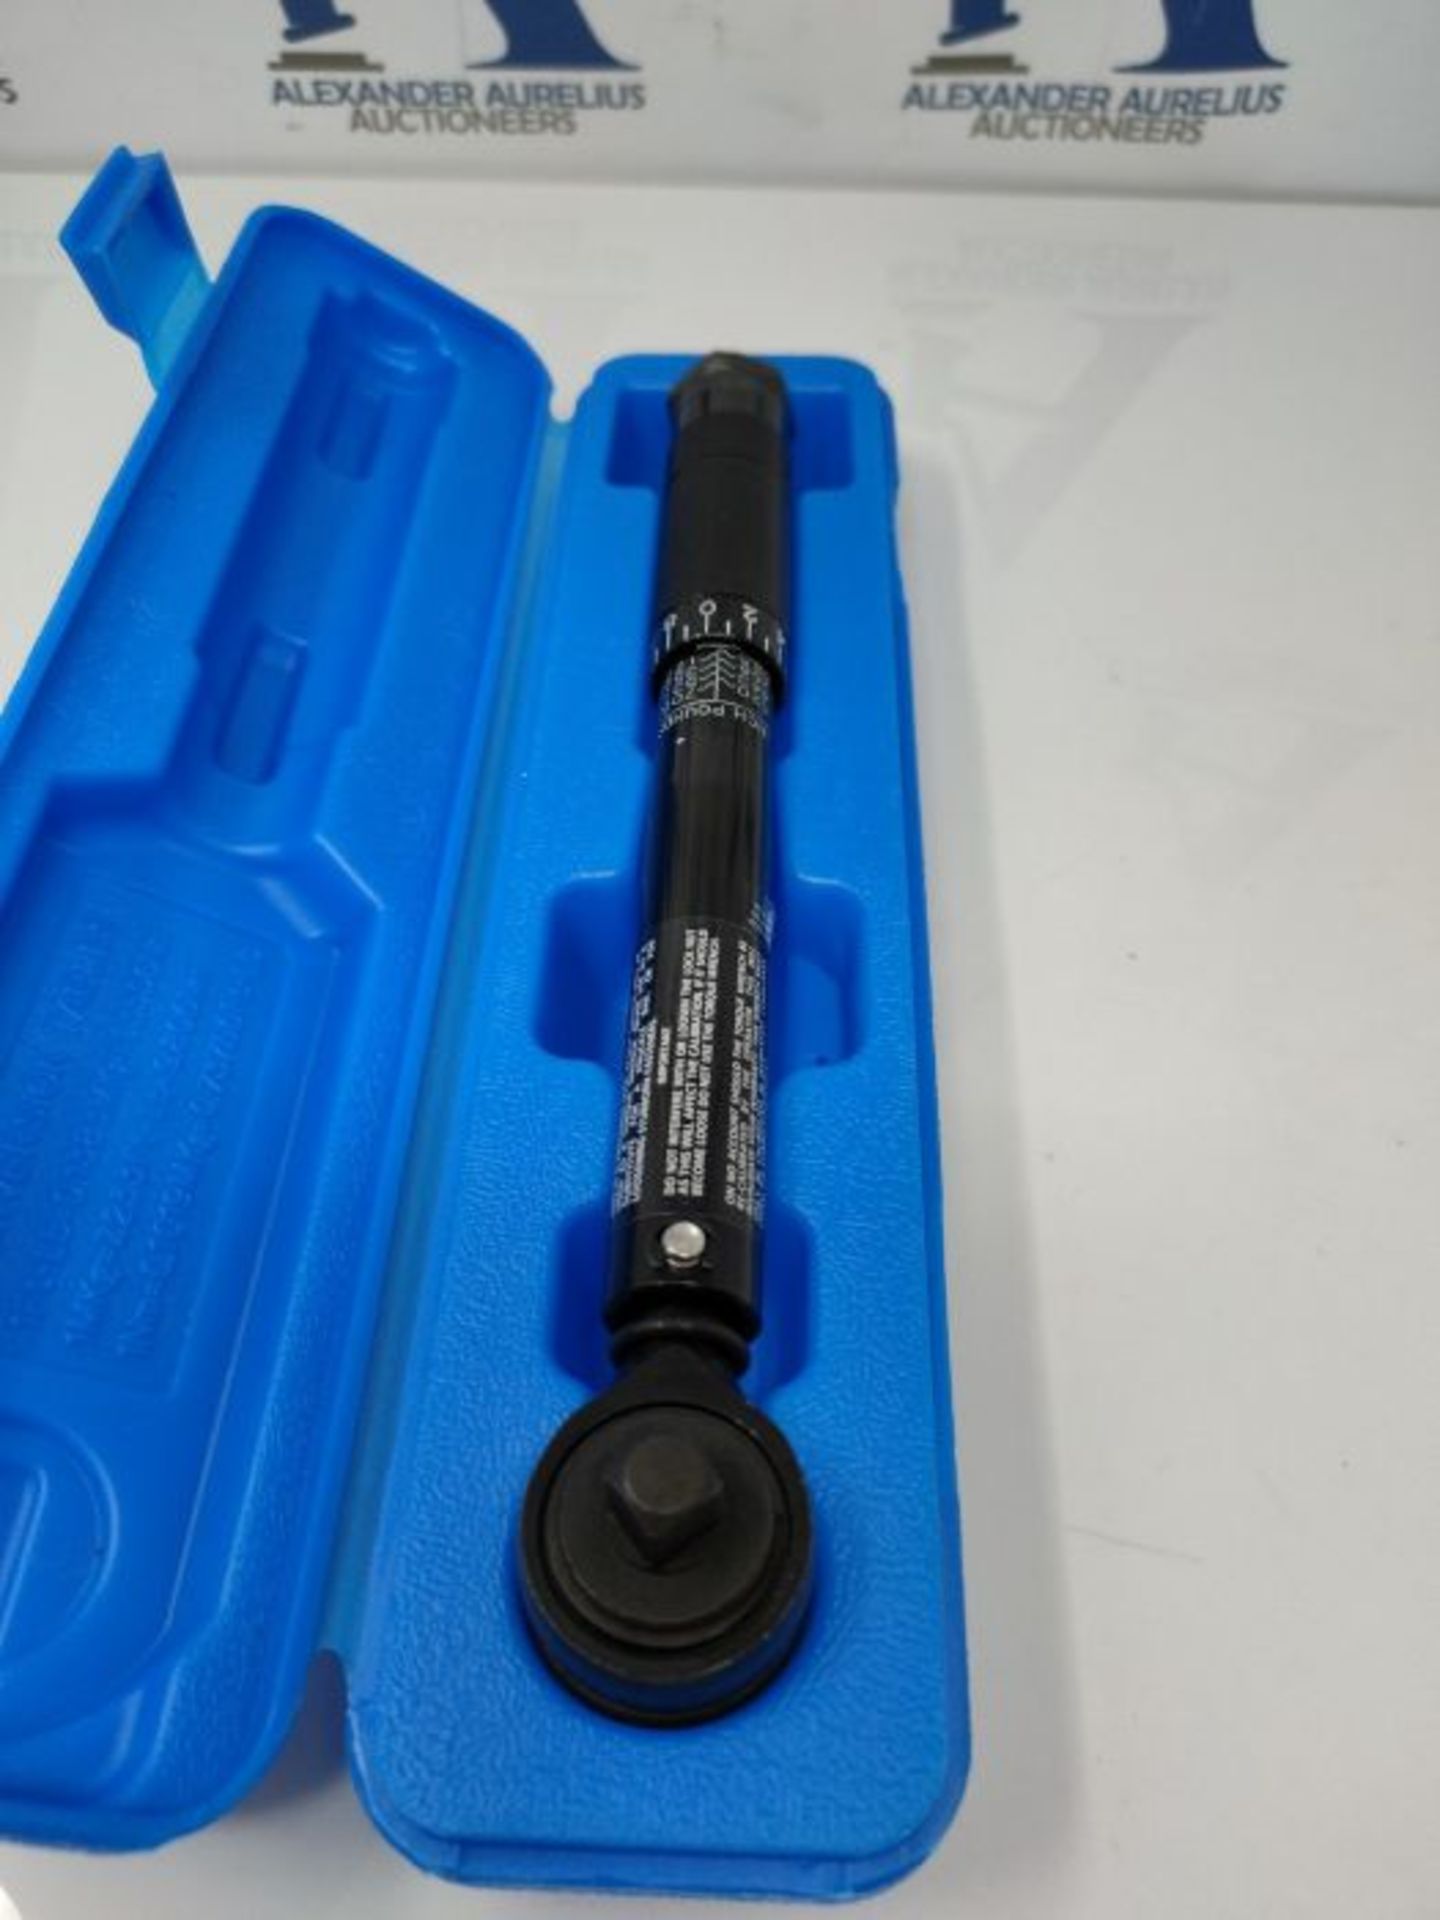 Draper 64534 Square Drive Ratchet Torque Wrench 3/8 Inch , Blue - Image 3 of 3